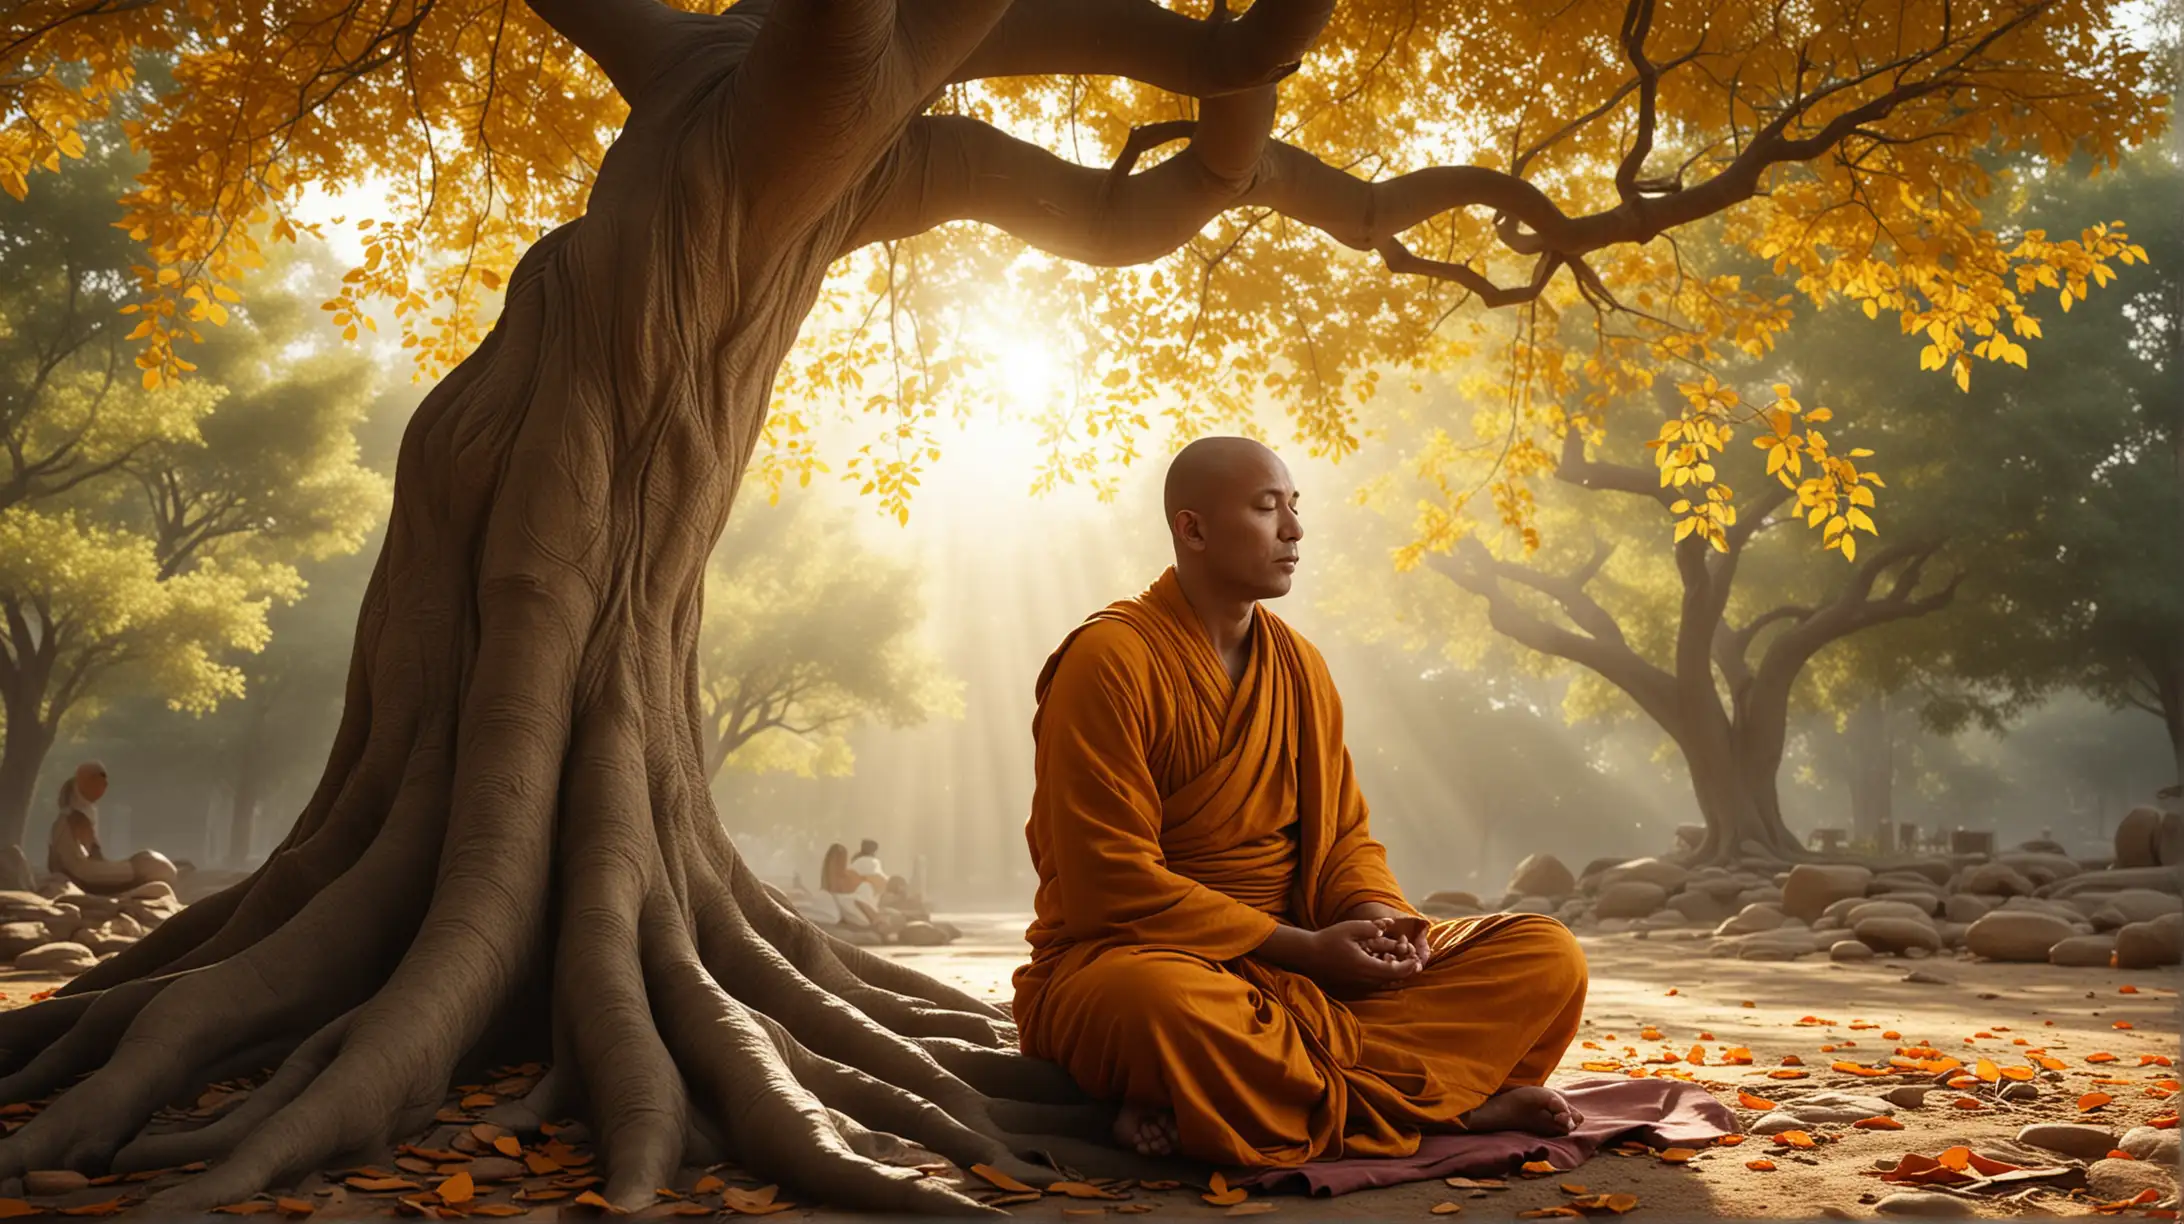 Tranquil Buddhist Monk Meditating under Bodhi Tree in Nature